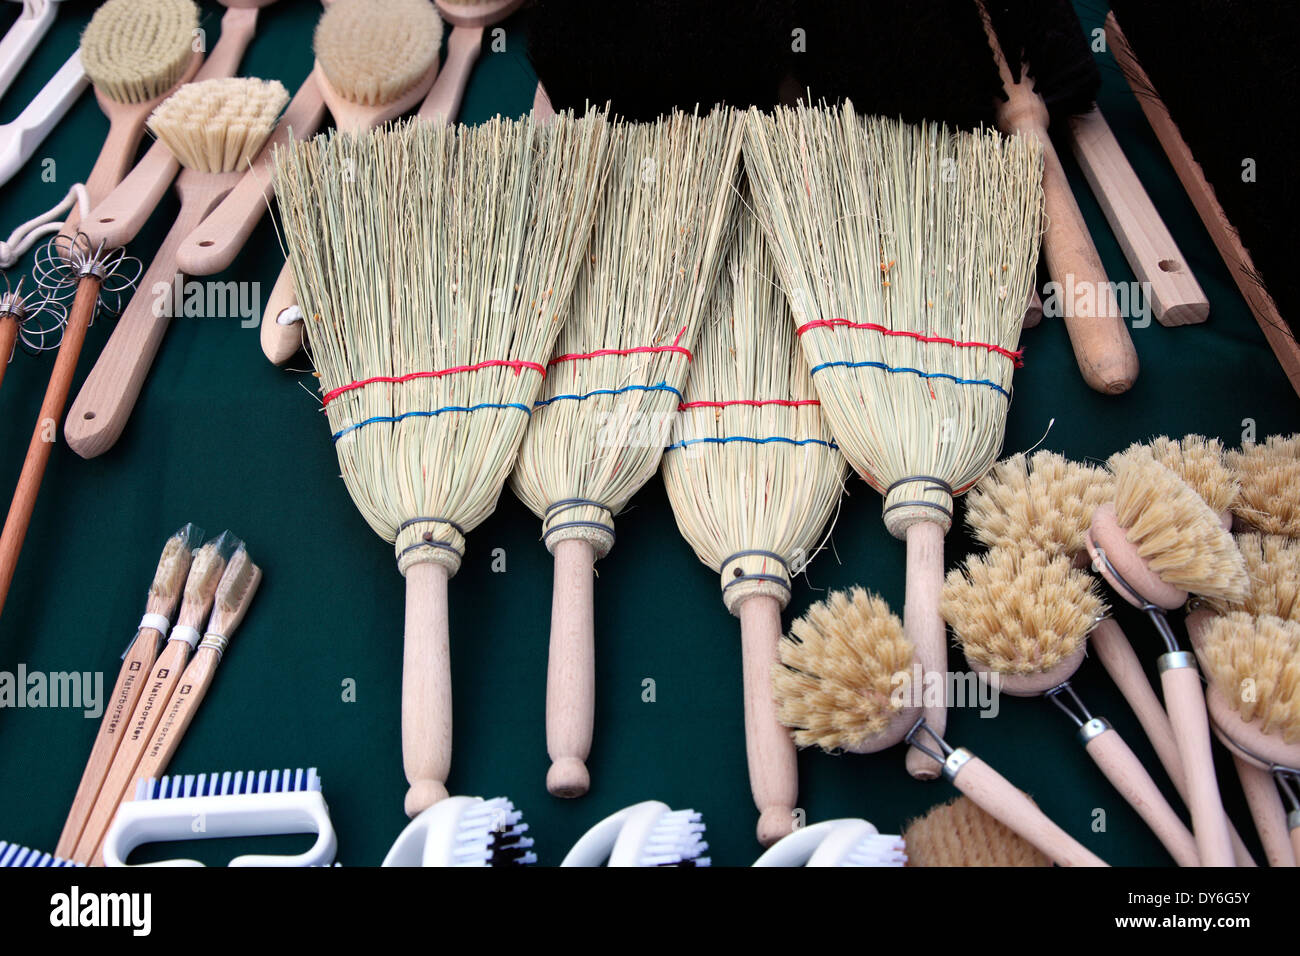 Brushes on sale in Linz Market in Austria Stock Photo